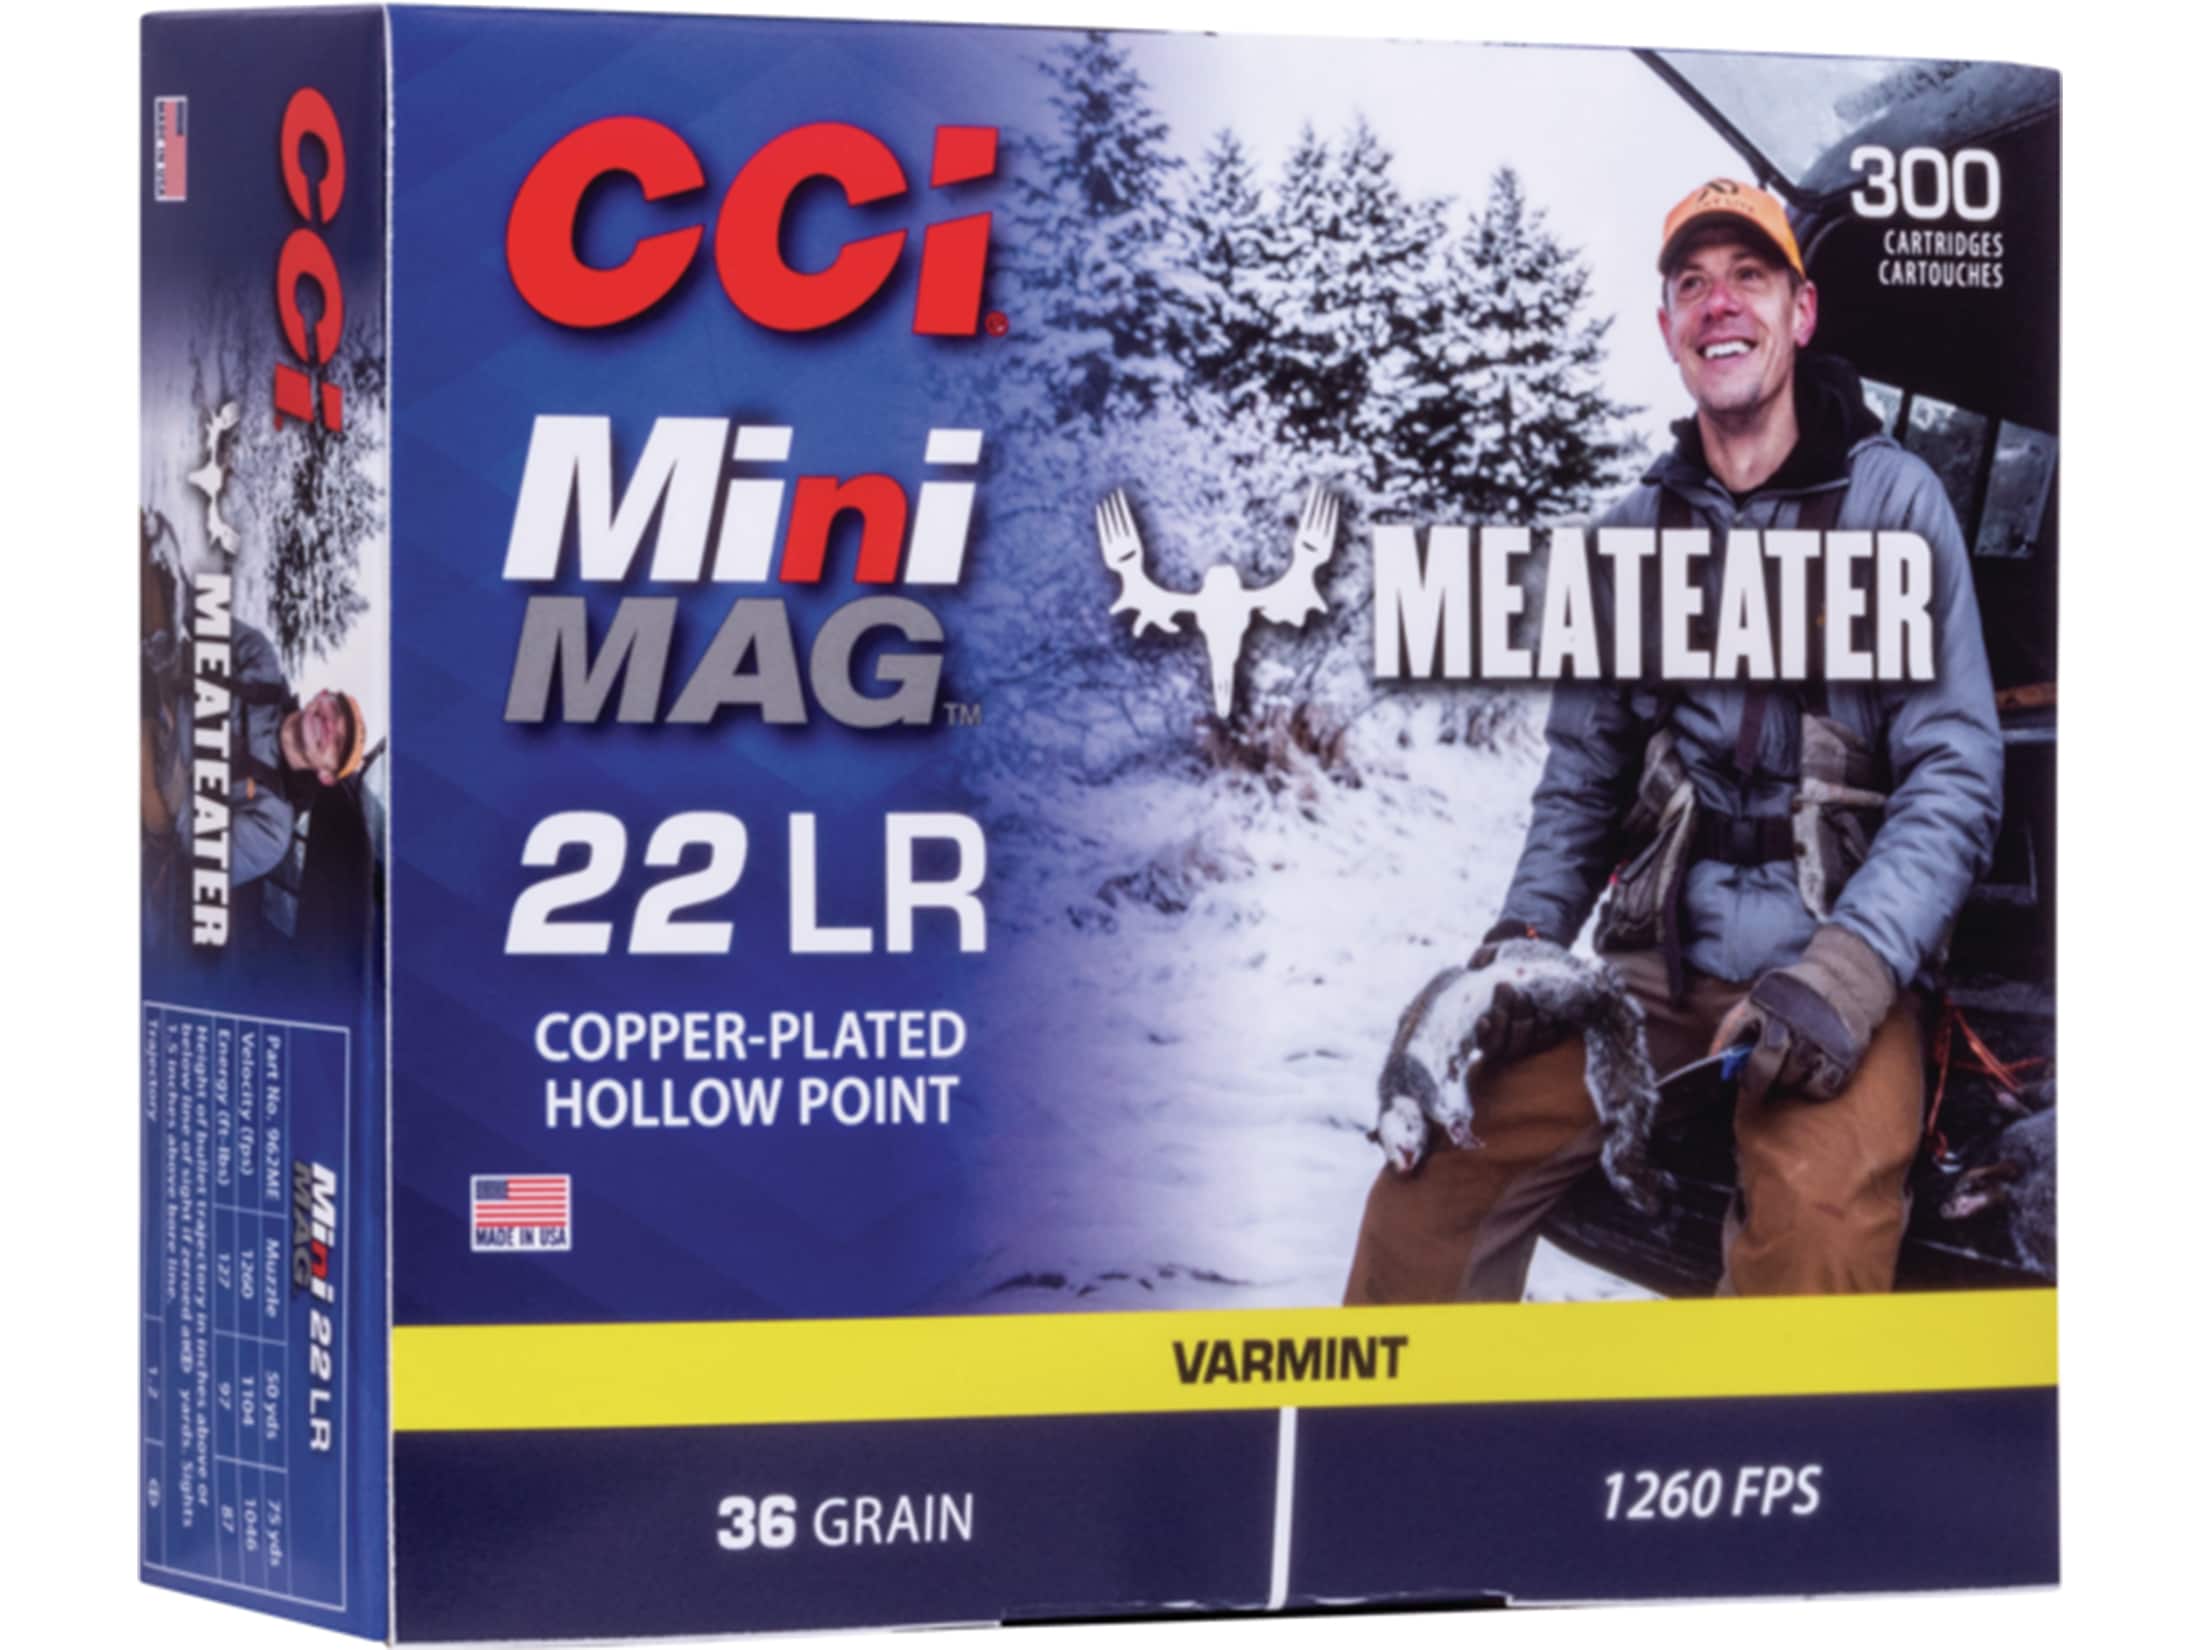 CCI Mini-Mag MeatEater Special Edition Ammunition 22 Long Rifle 36 Grain Plated Lead Hollow Point